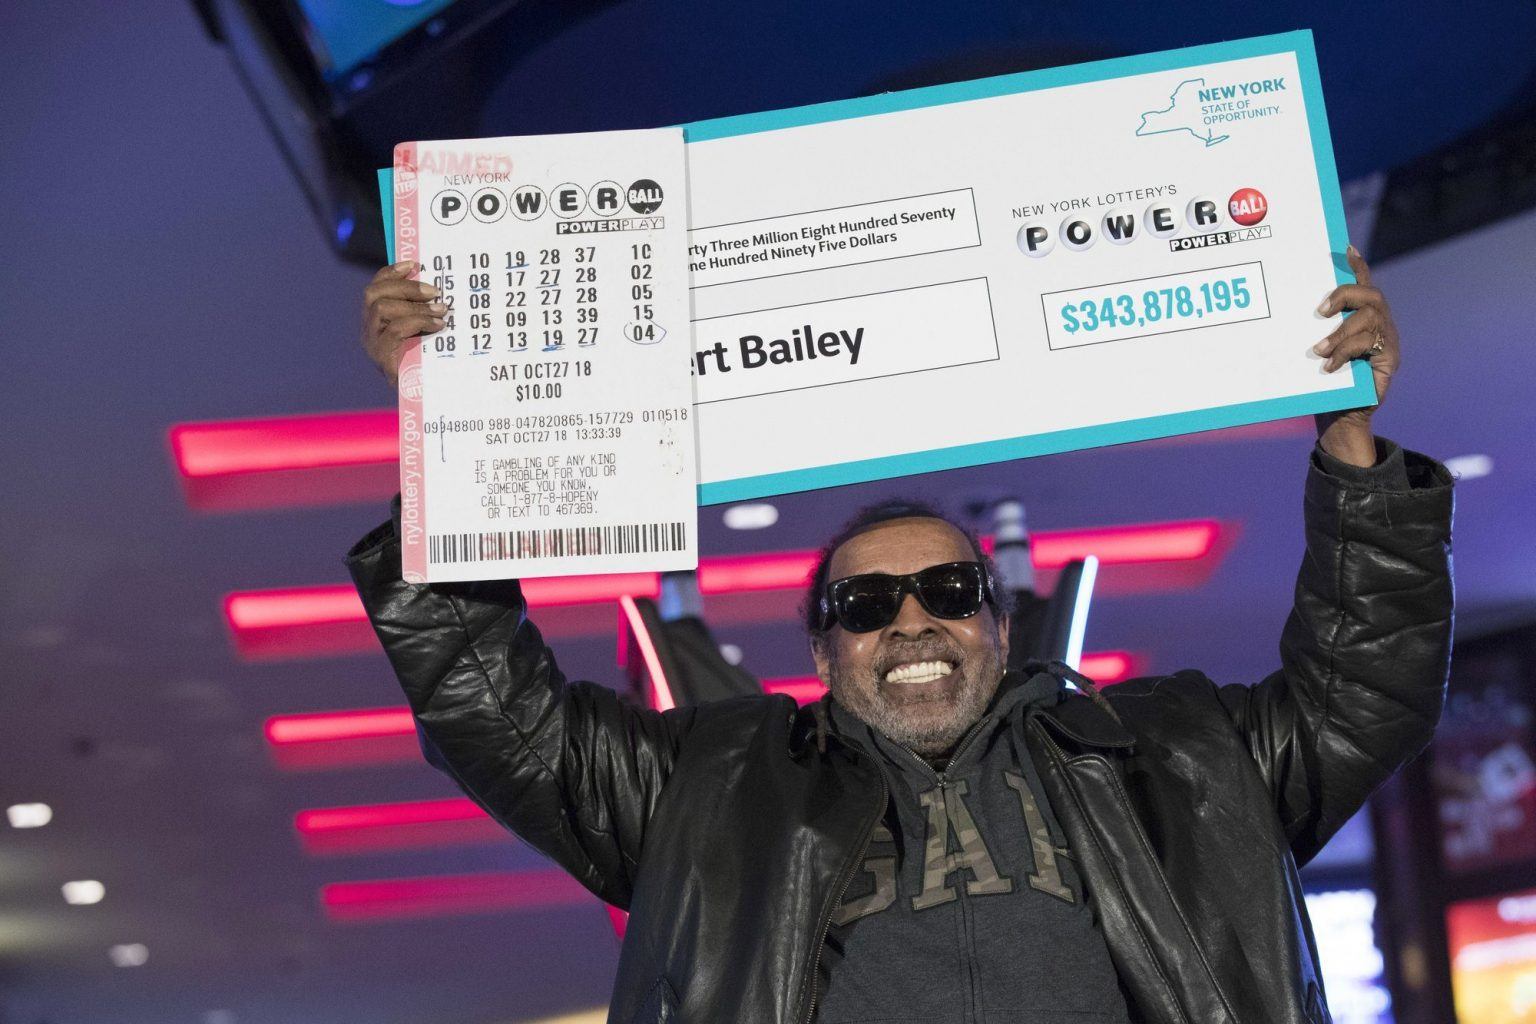 Powerball Winner to Test Luck Again, Says He's Going to Las Vegas